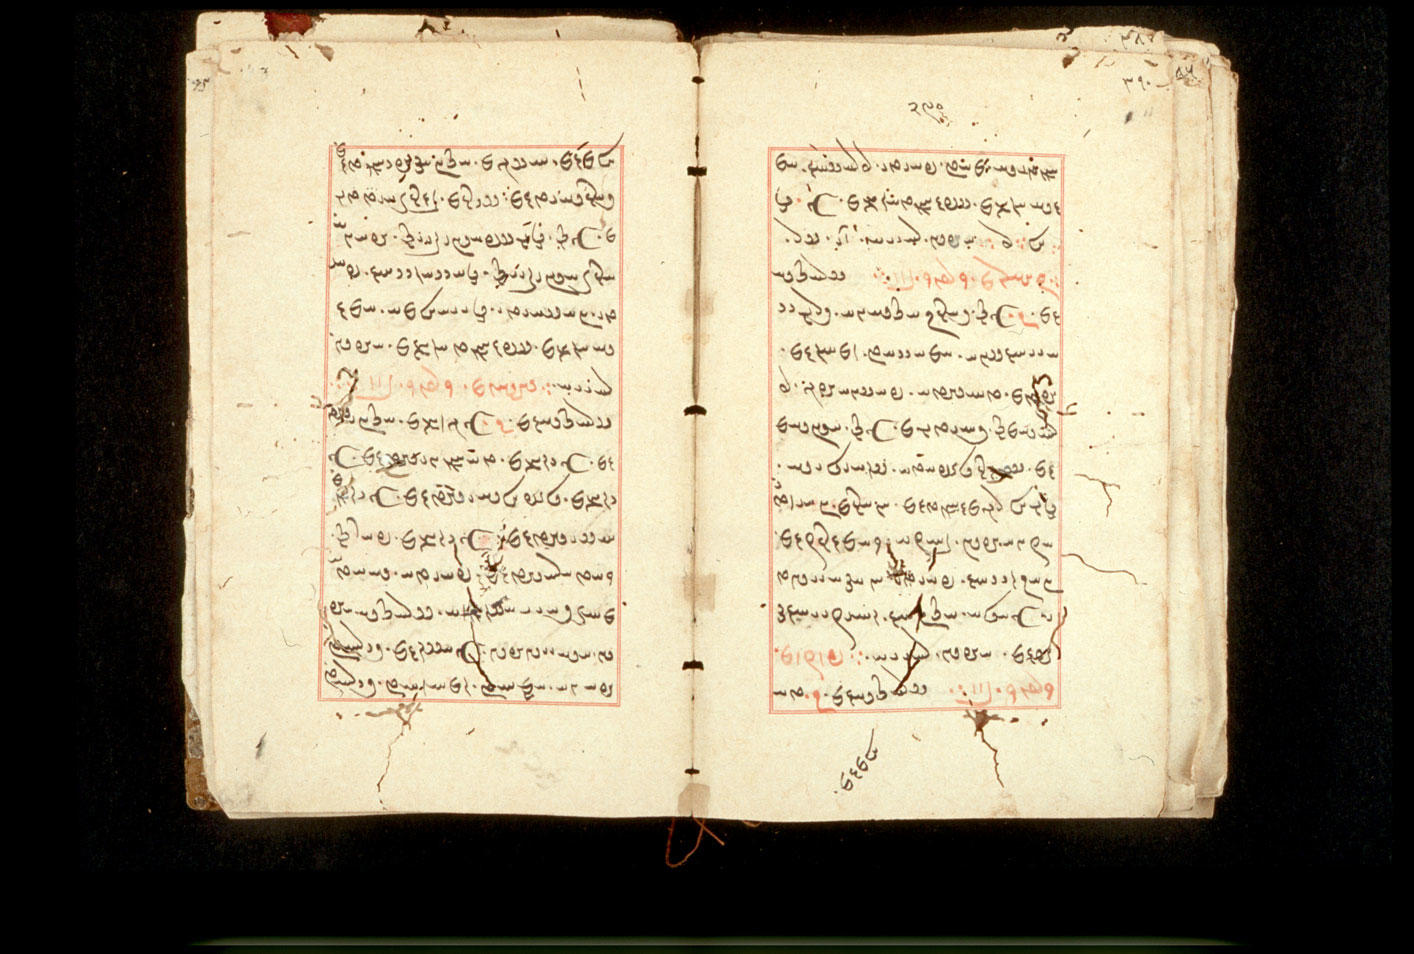 Folios 290v (right) and 291r (left)